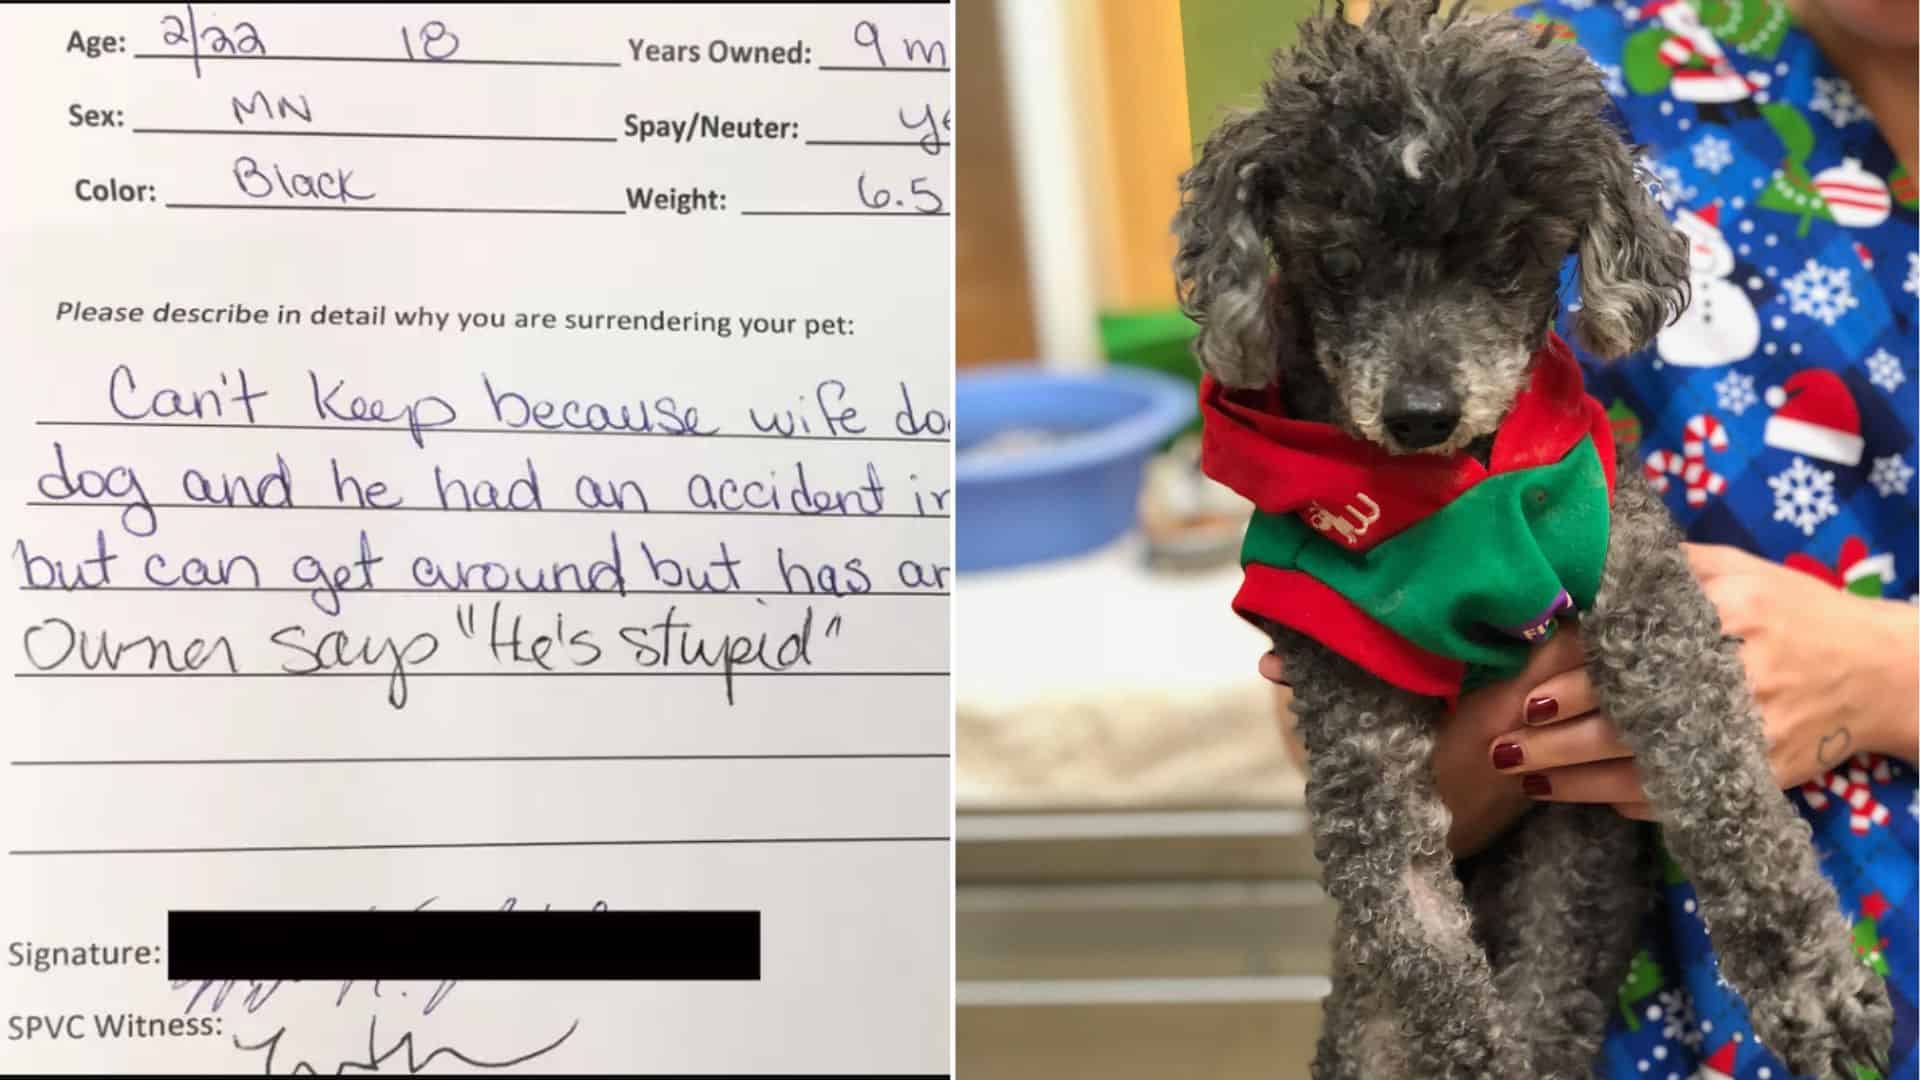 18-Year-Old Poodle Set To Be Euthanized Because His Owners Think ‘He’s Stupid’